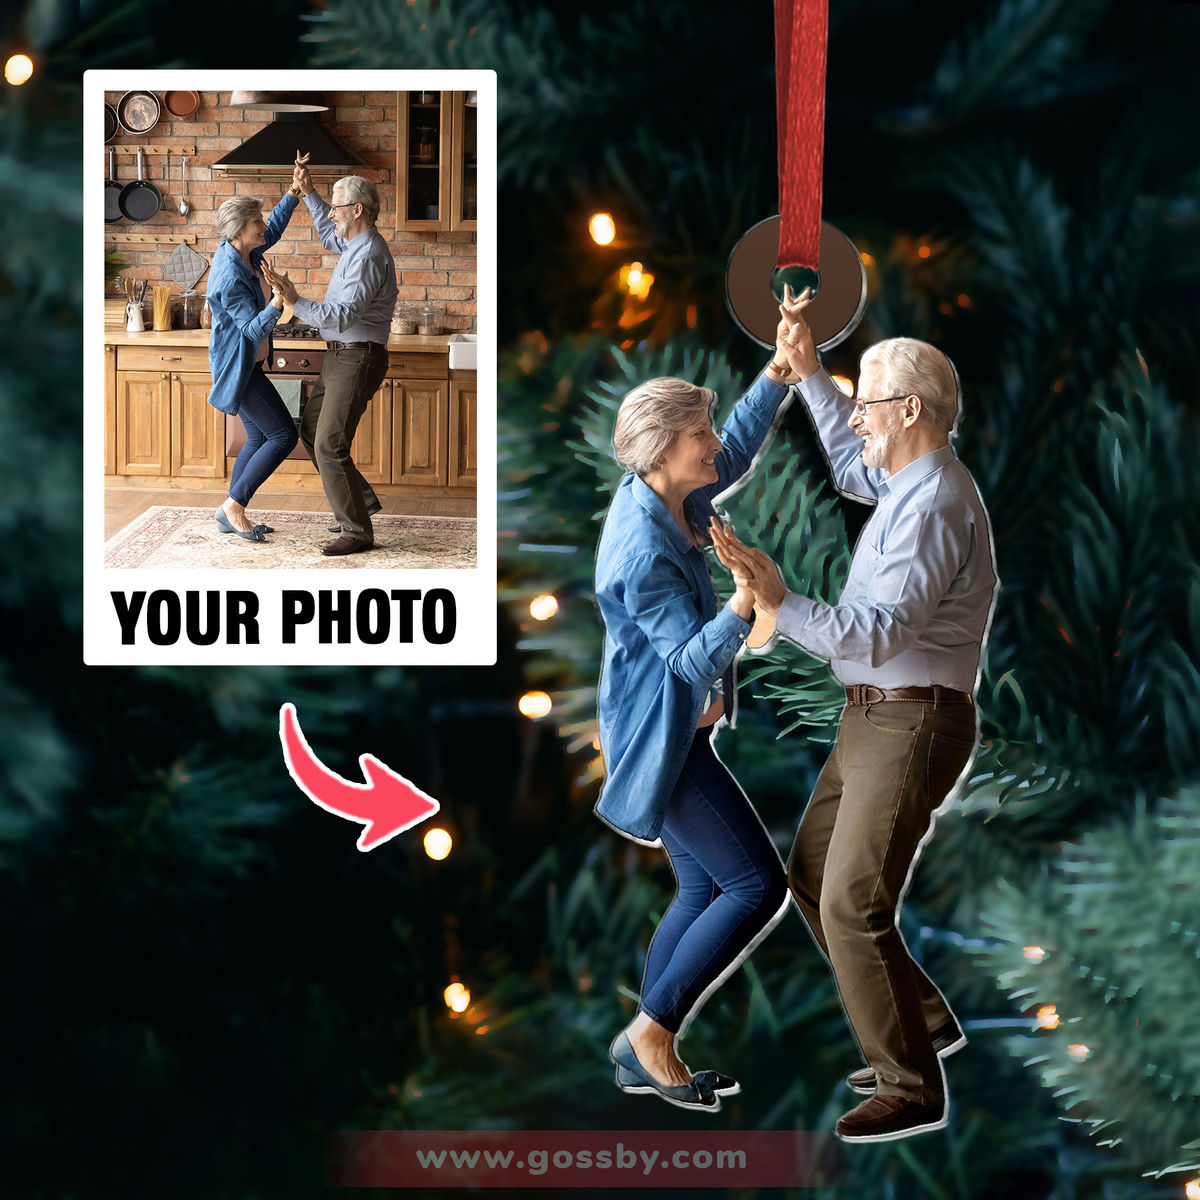 Customized Your Photo Ornaments - Gift for Women - Gift for Men - Couple Photo Gifts, Christmas Gifts for Couple